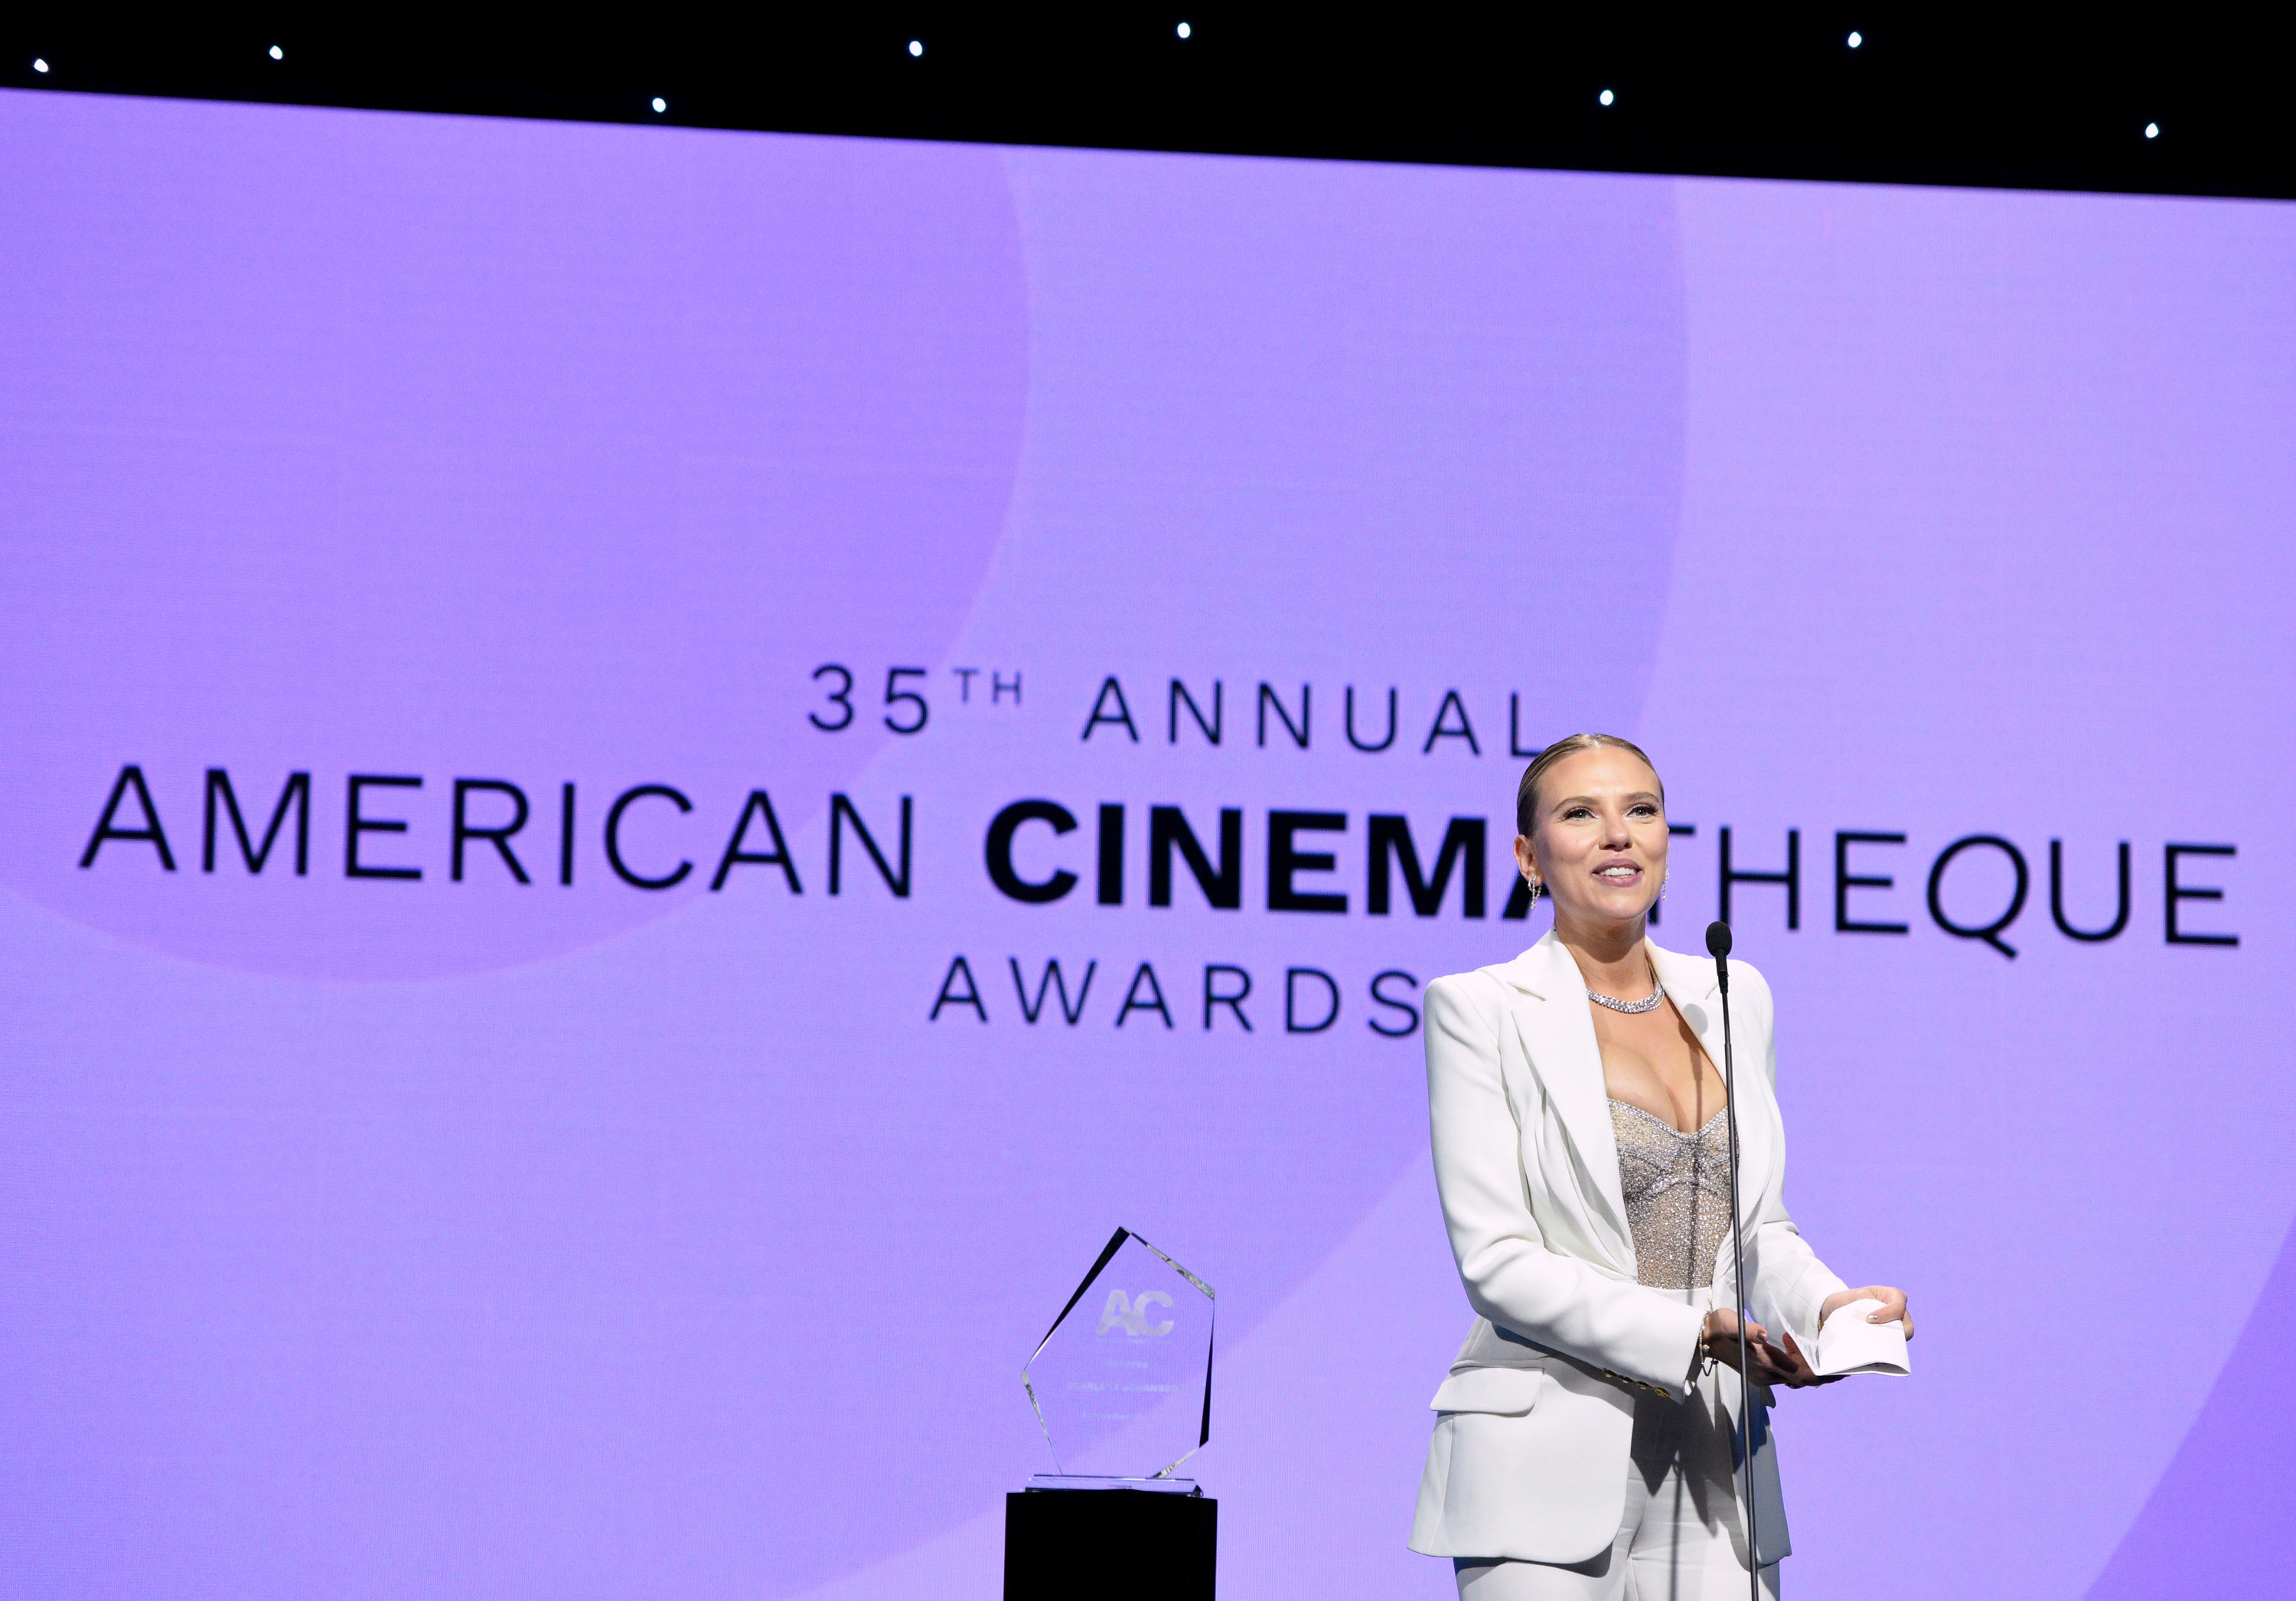 Scarlett behind a mic at the 35th American CinemaTheque Awards in a white suit